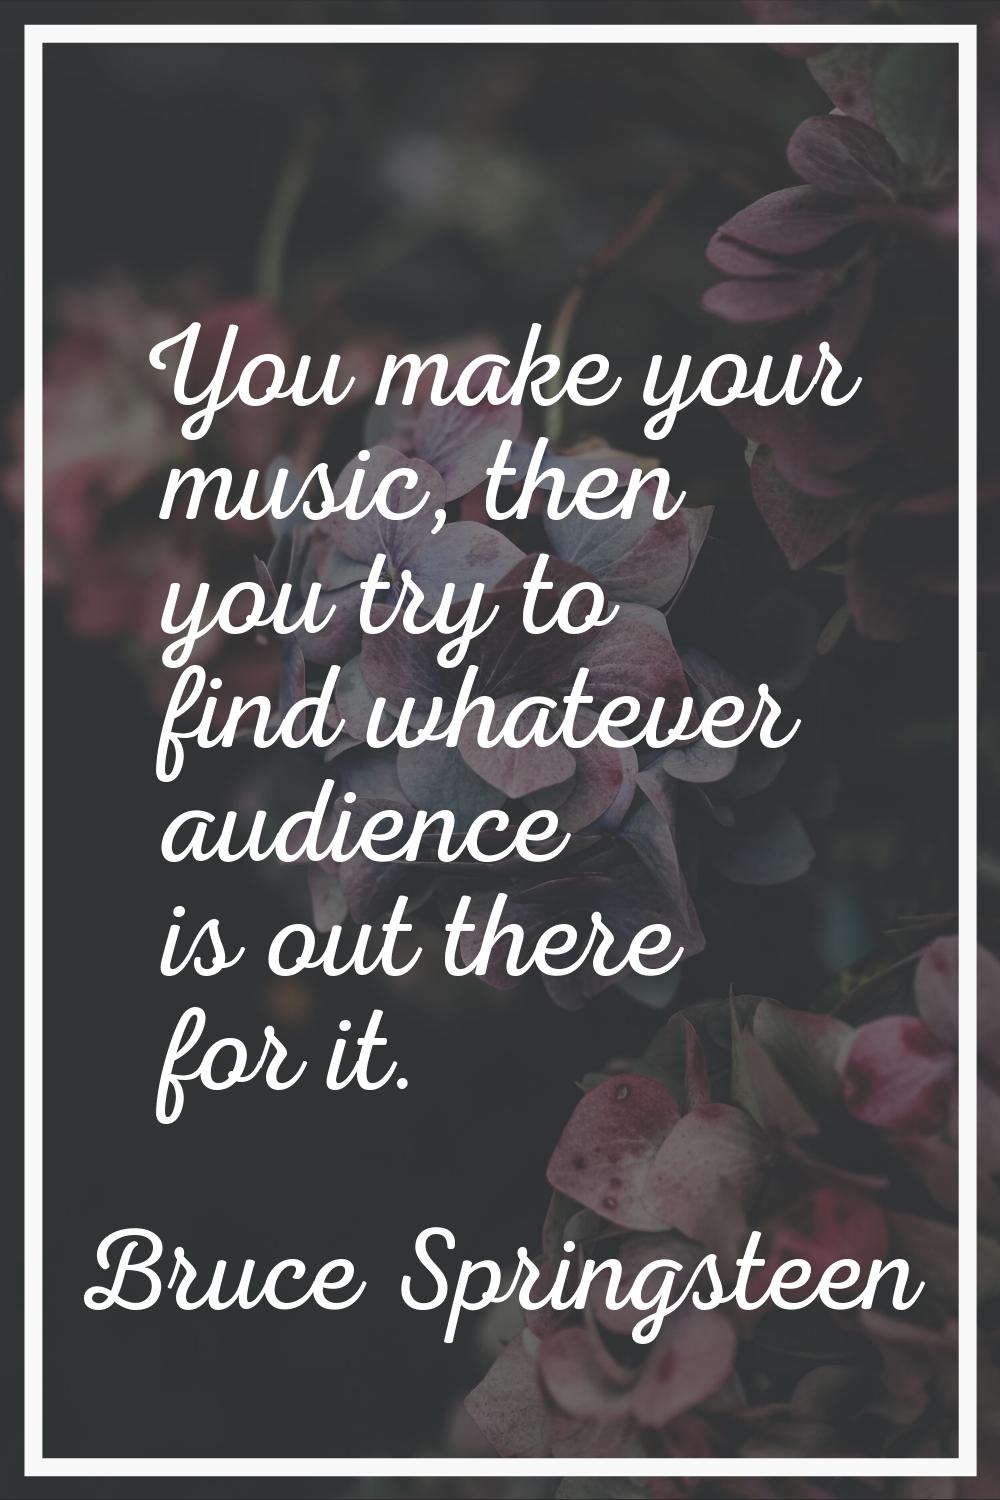 You make your music, then you try to find whatever audience is out there for it.